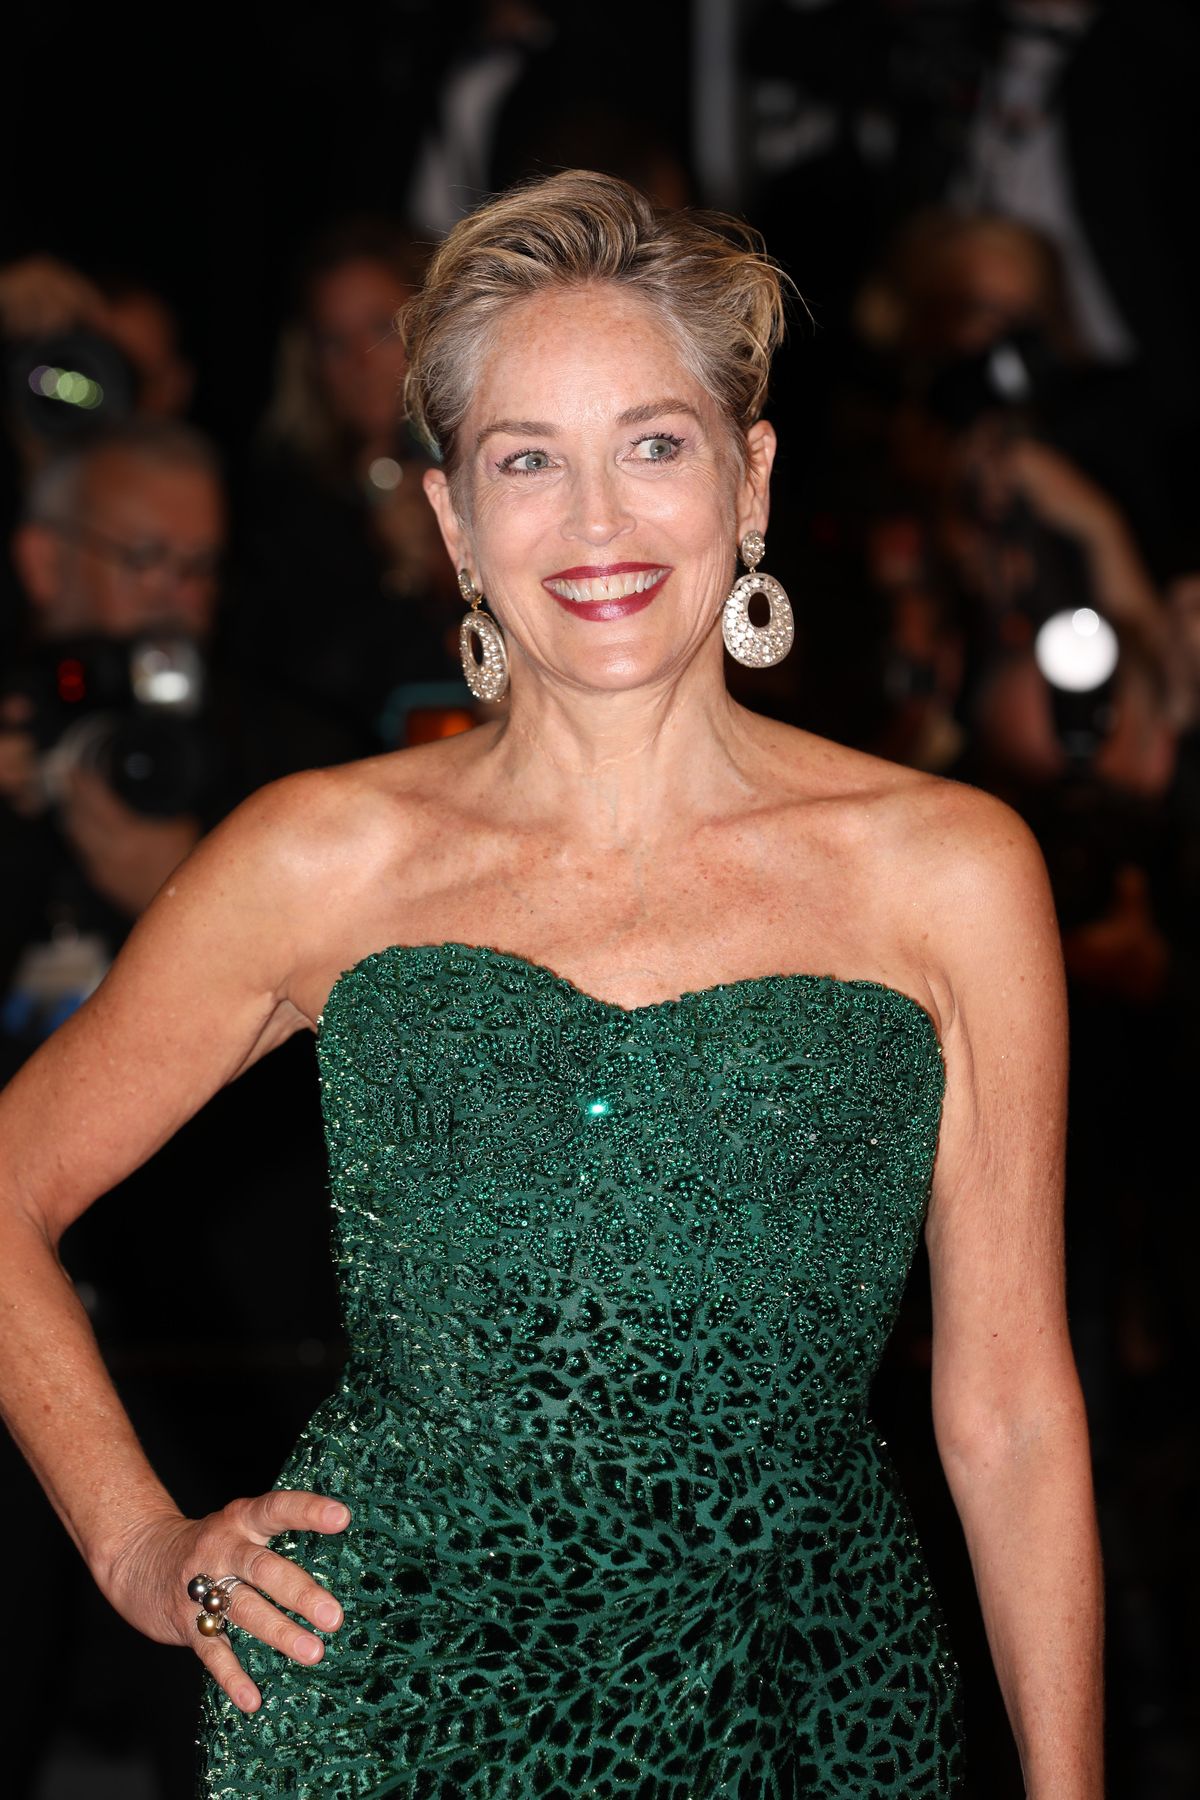 Sharon Stone wows at Cannes in emerald Dolce & Gabbana dress